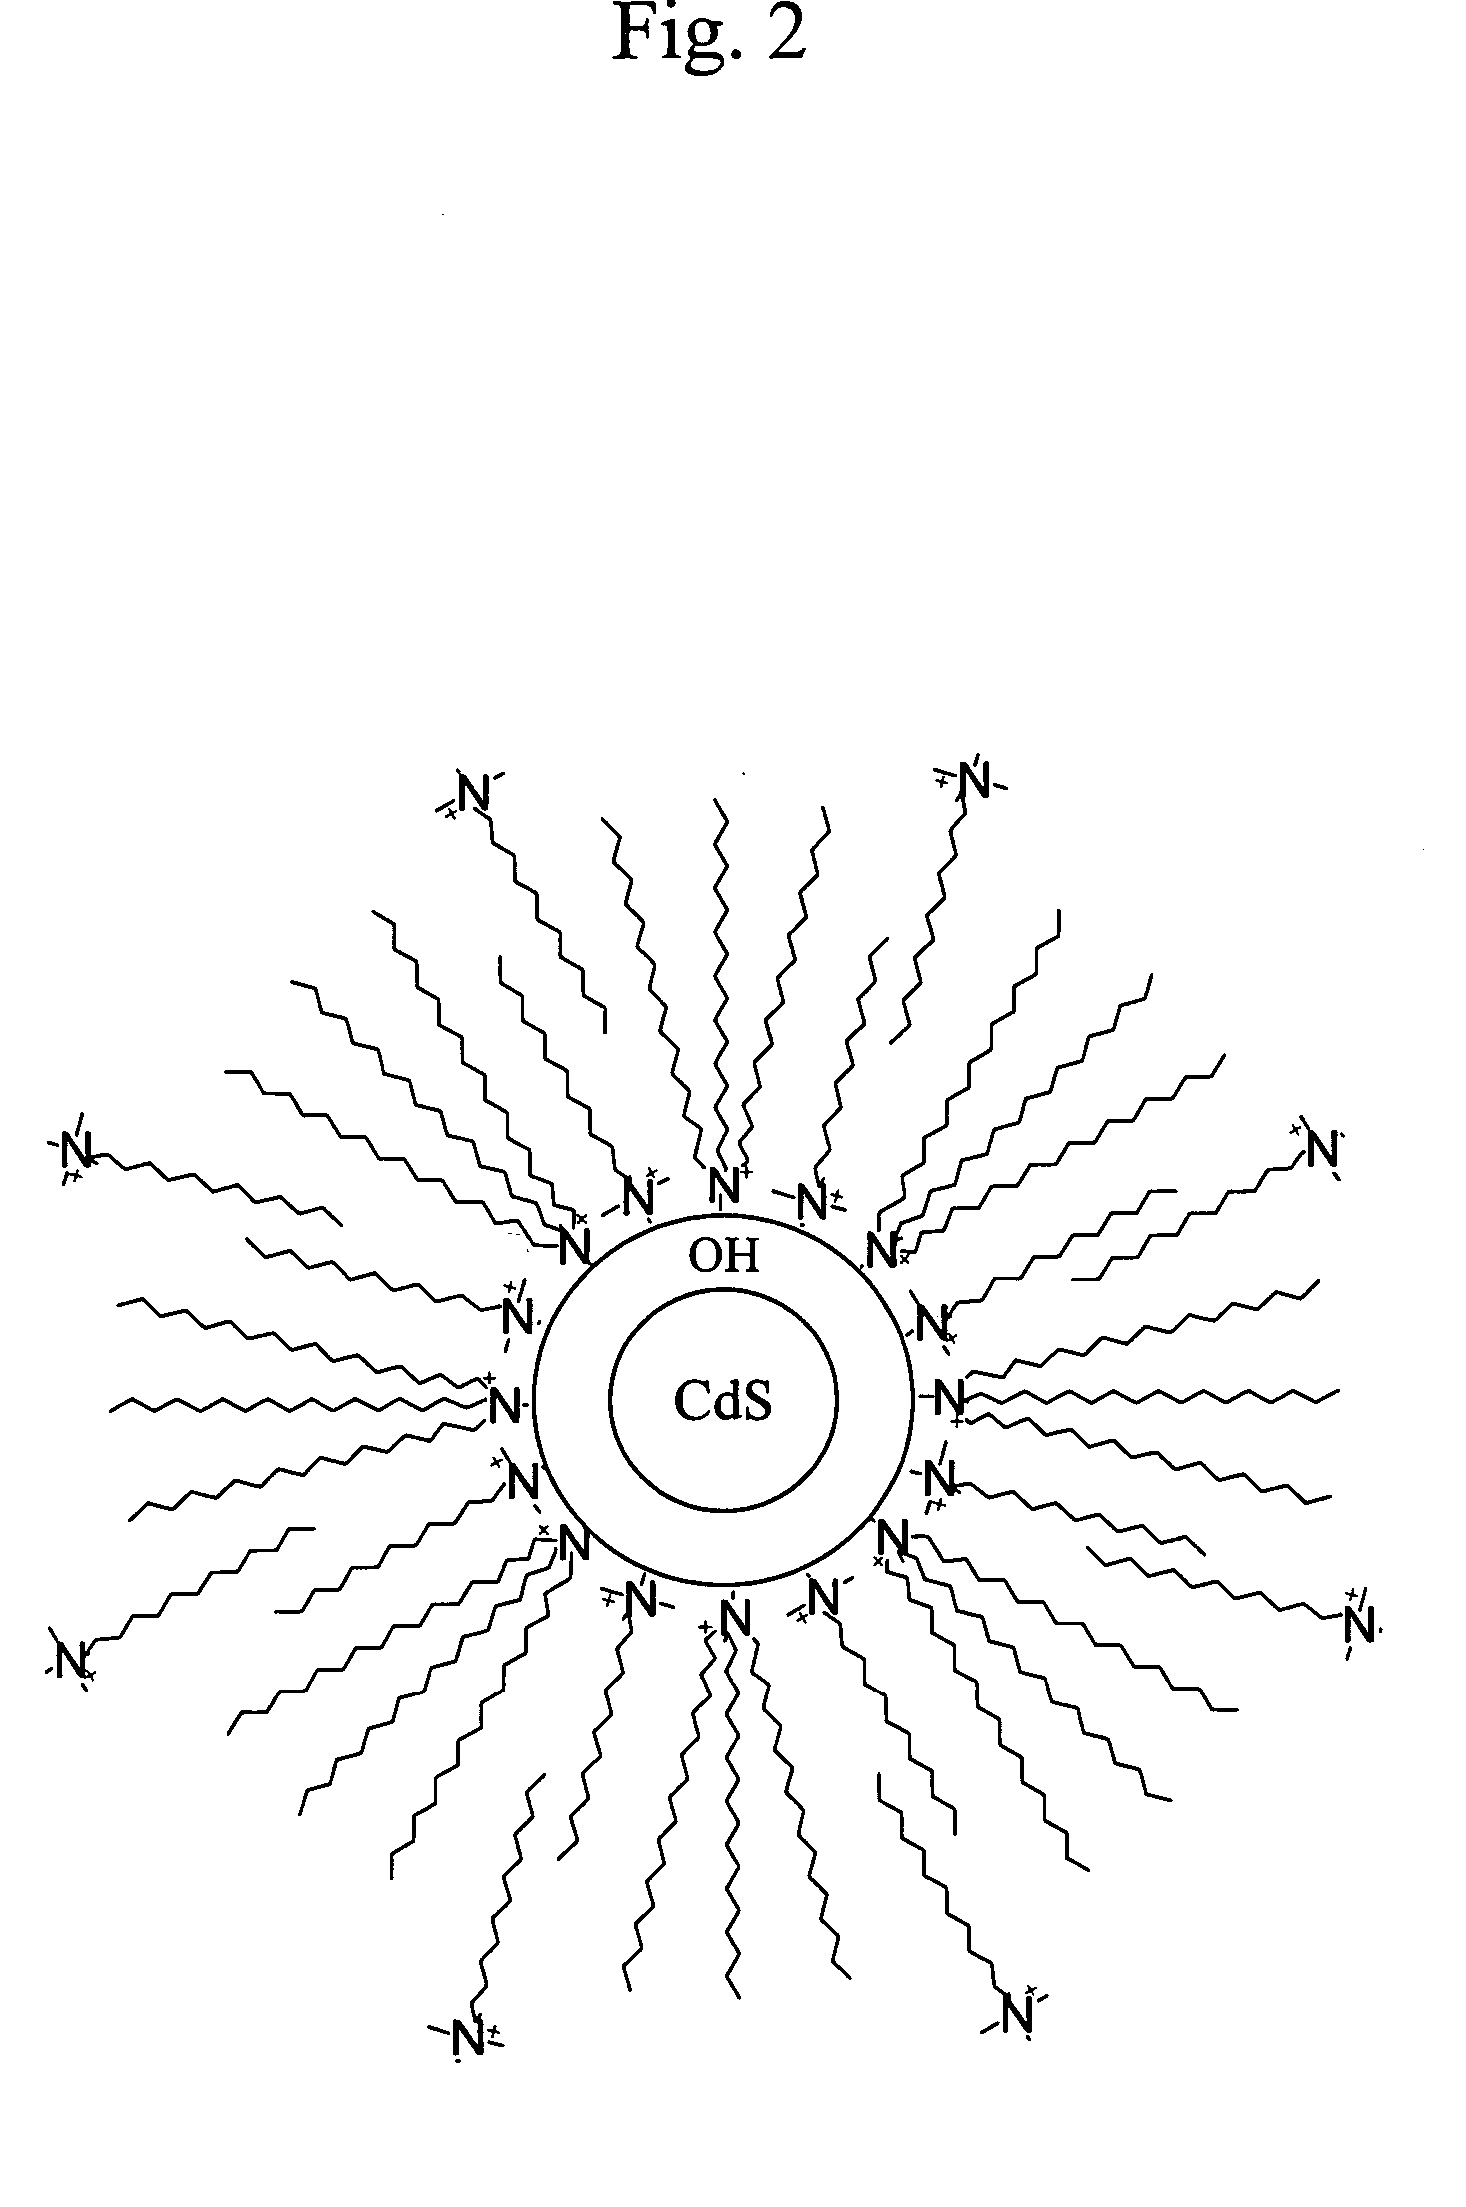 Semiconductor nanoparticle surface modification method